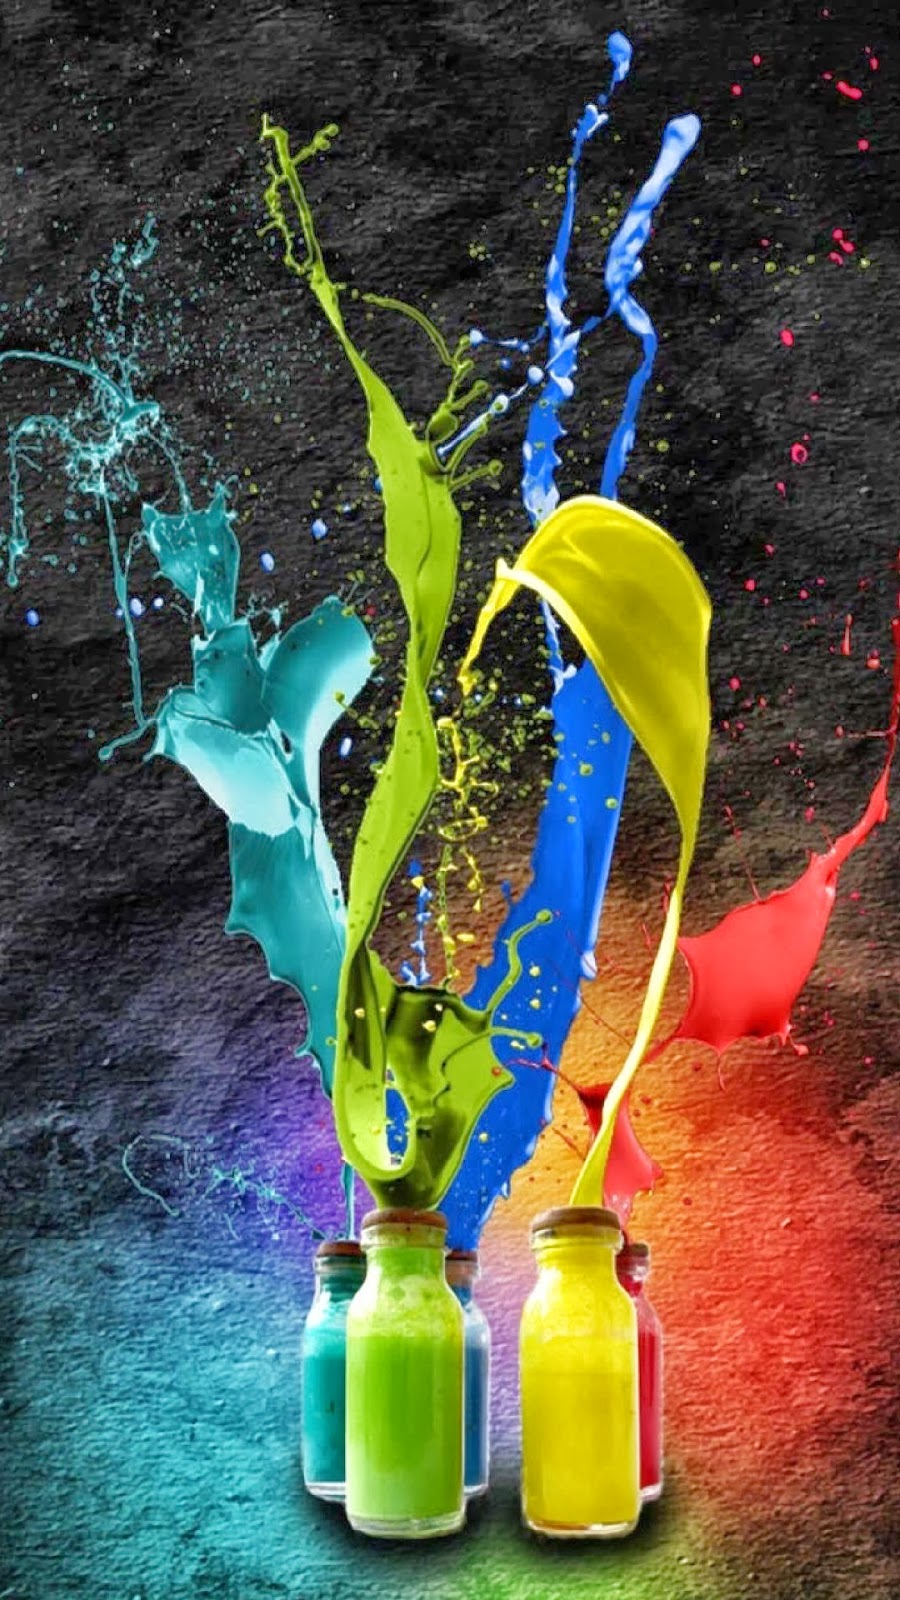 samsung s4 wallpaper,nepenthes,glas,pflanze,kunst